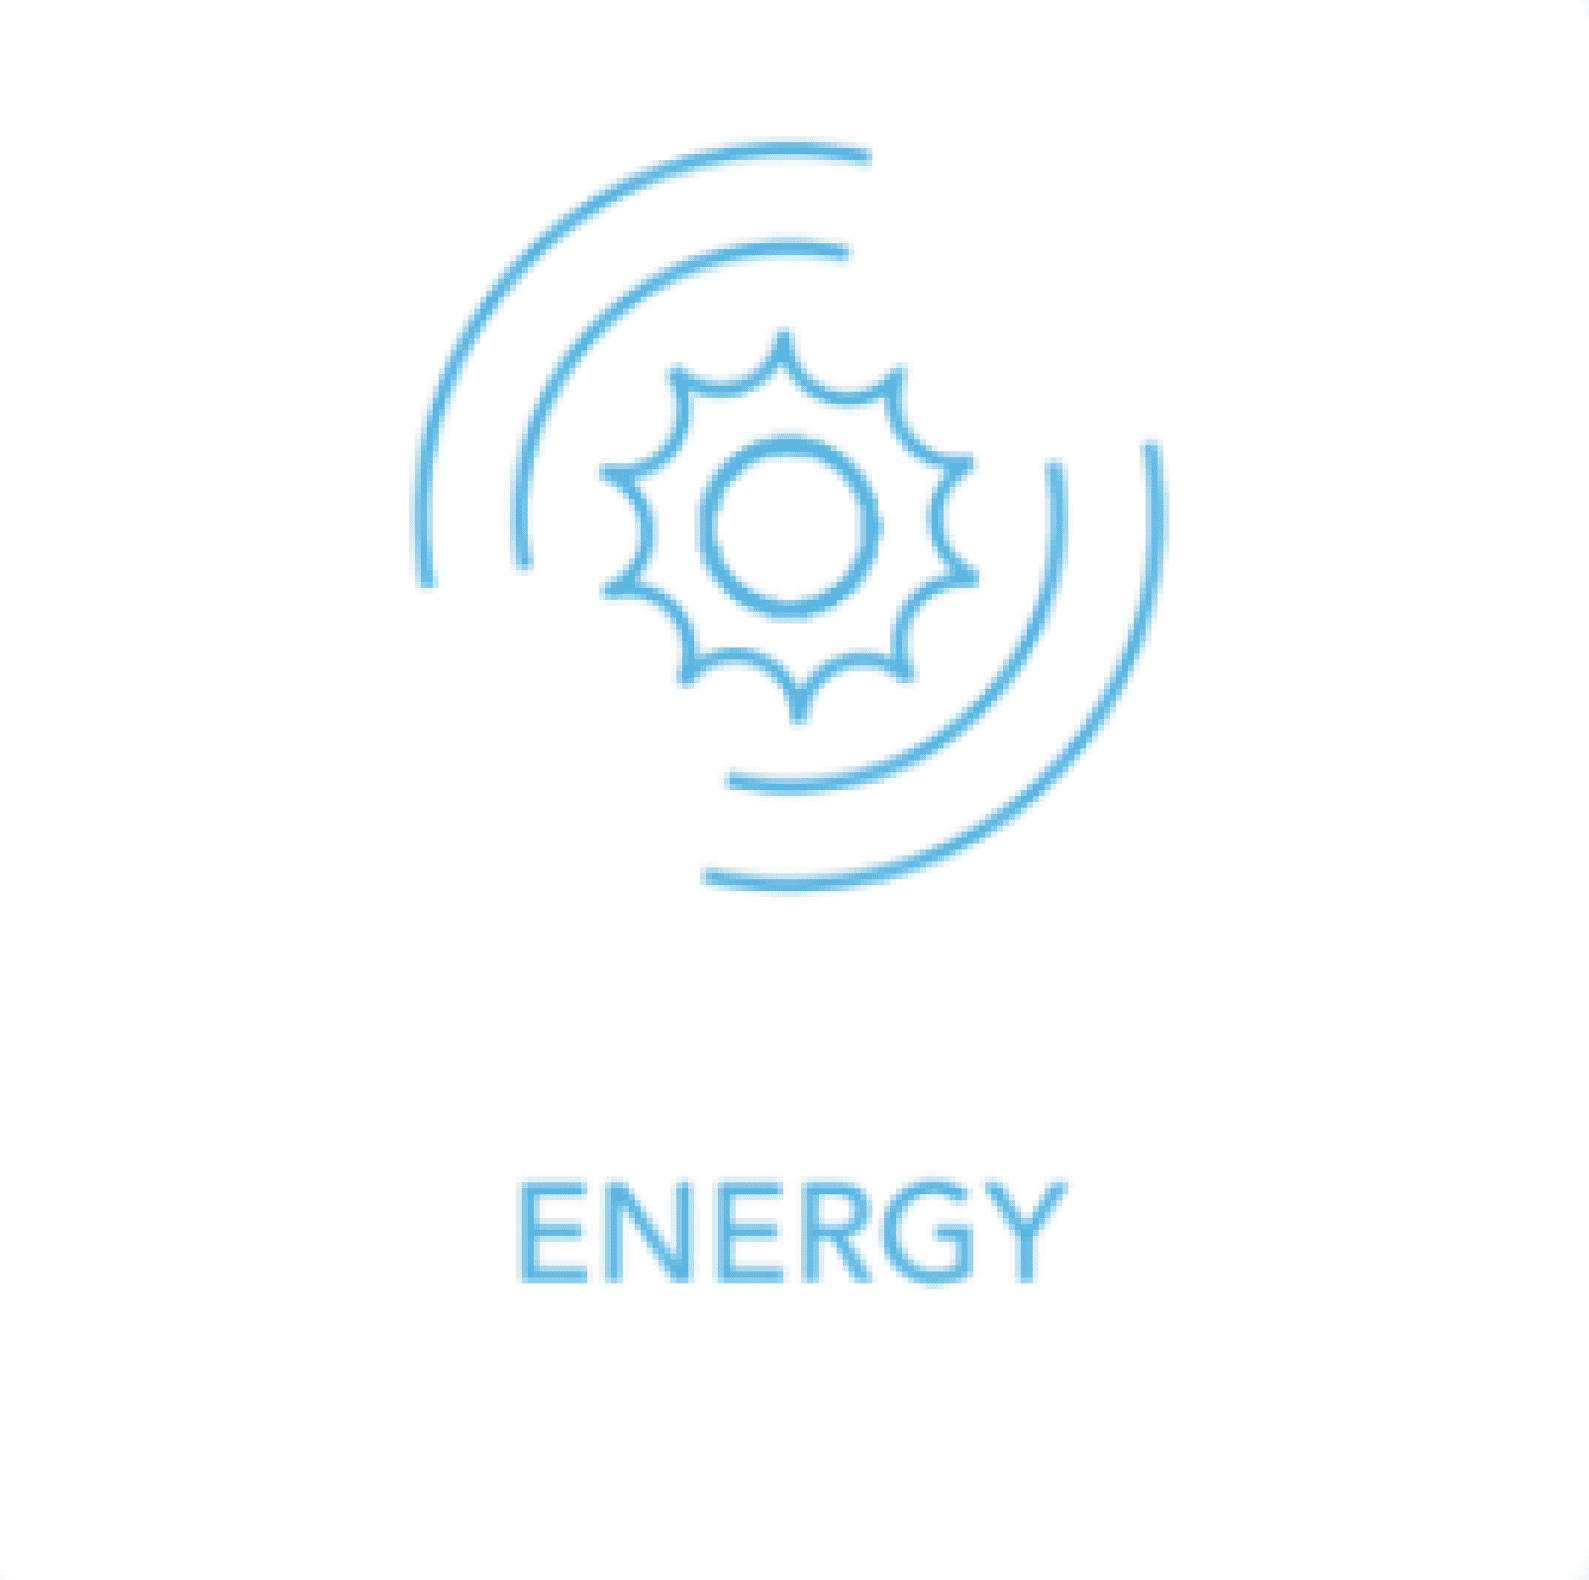 A blue icon with the word energy in it.